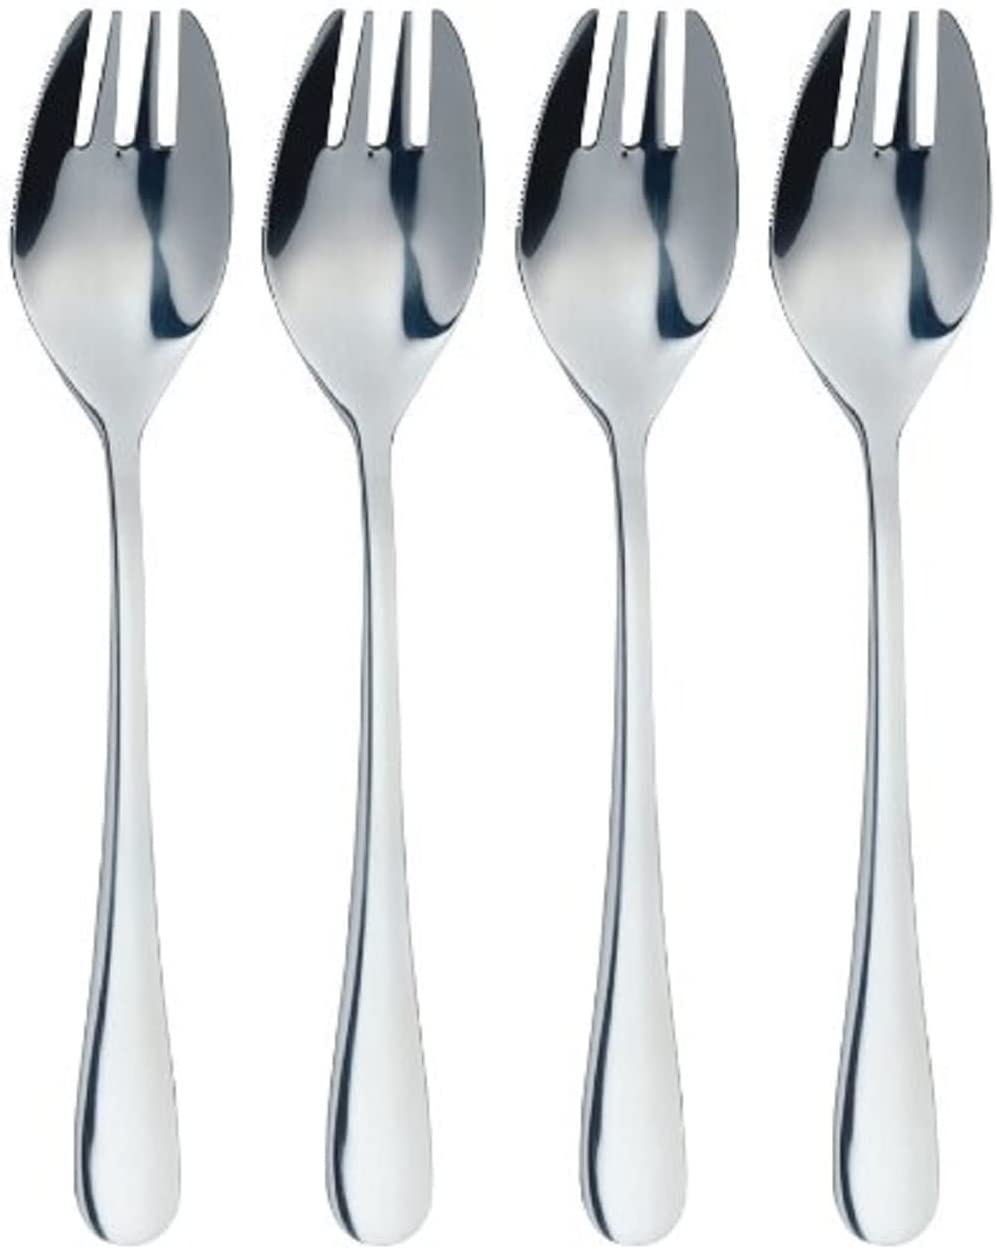 Master Class Stainless Steel Buffet Forks, 16.5 cm (Set of 4)